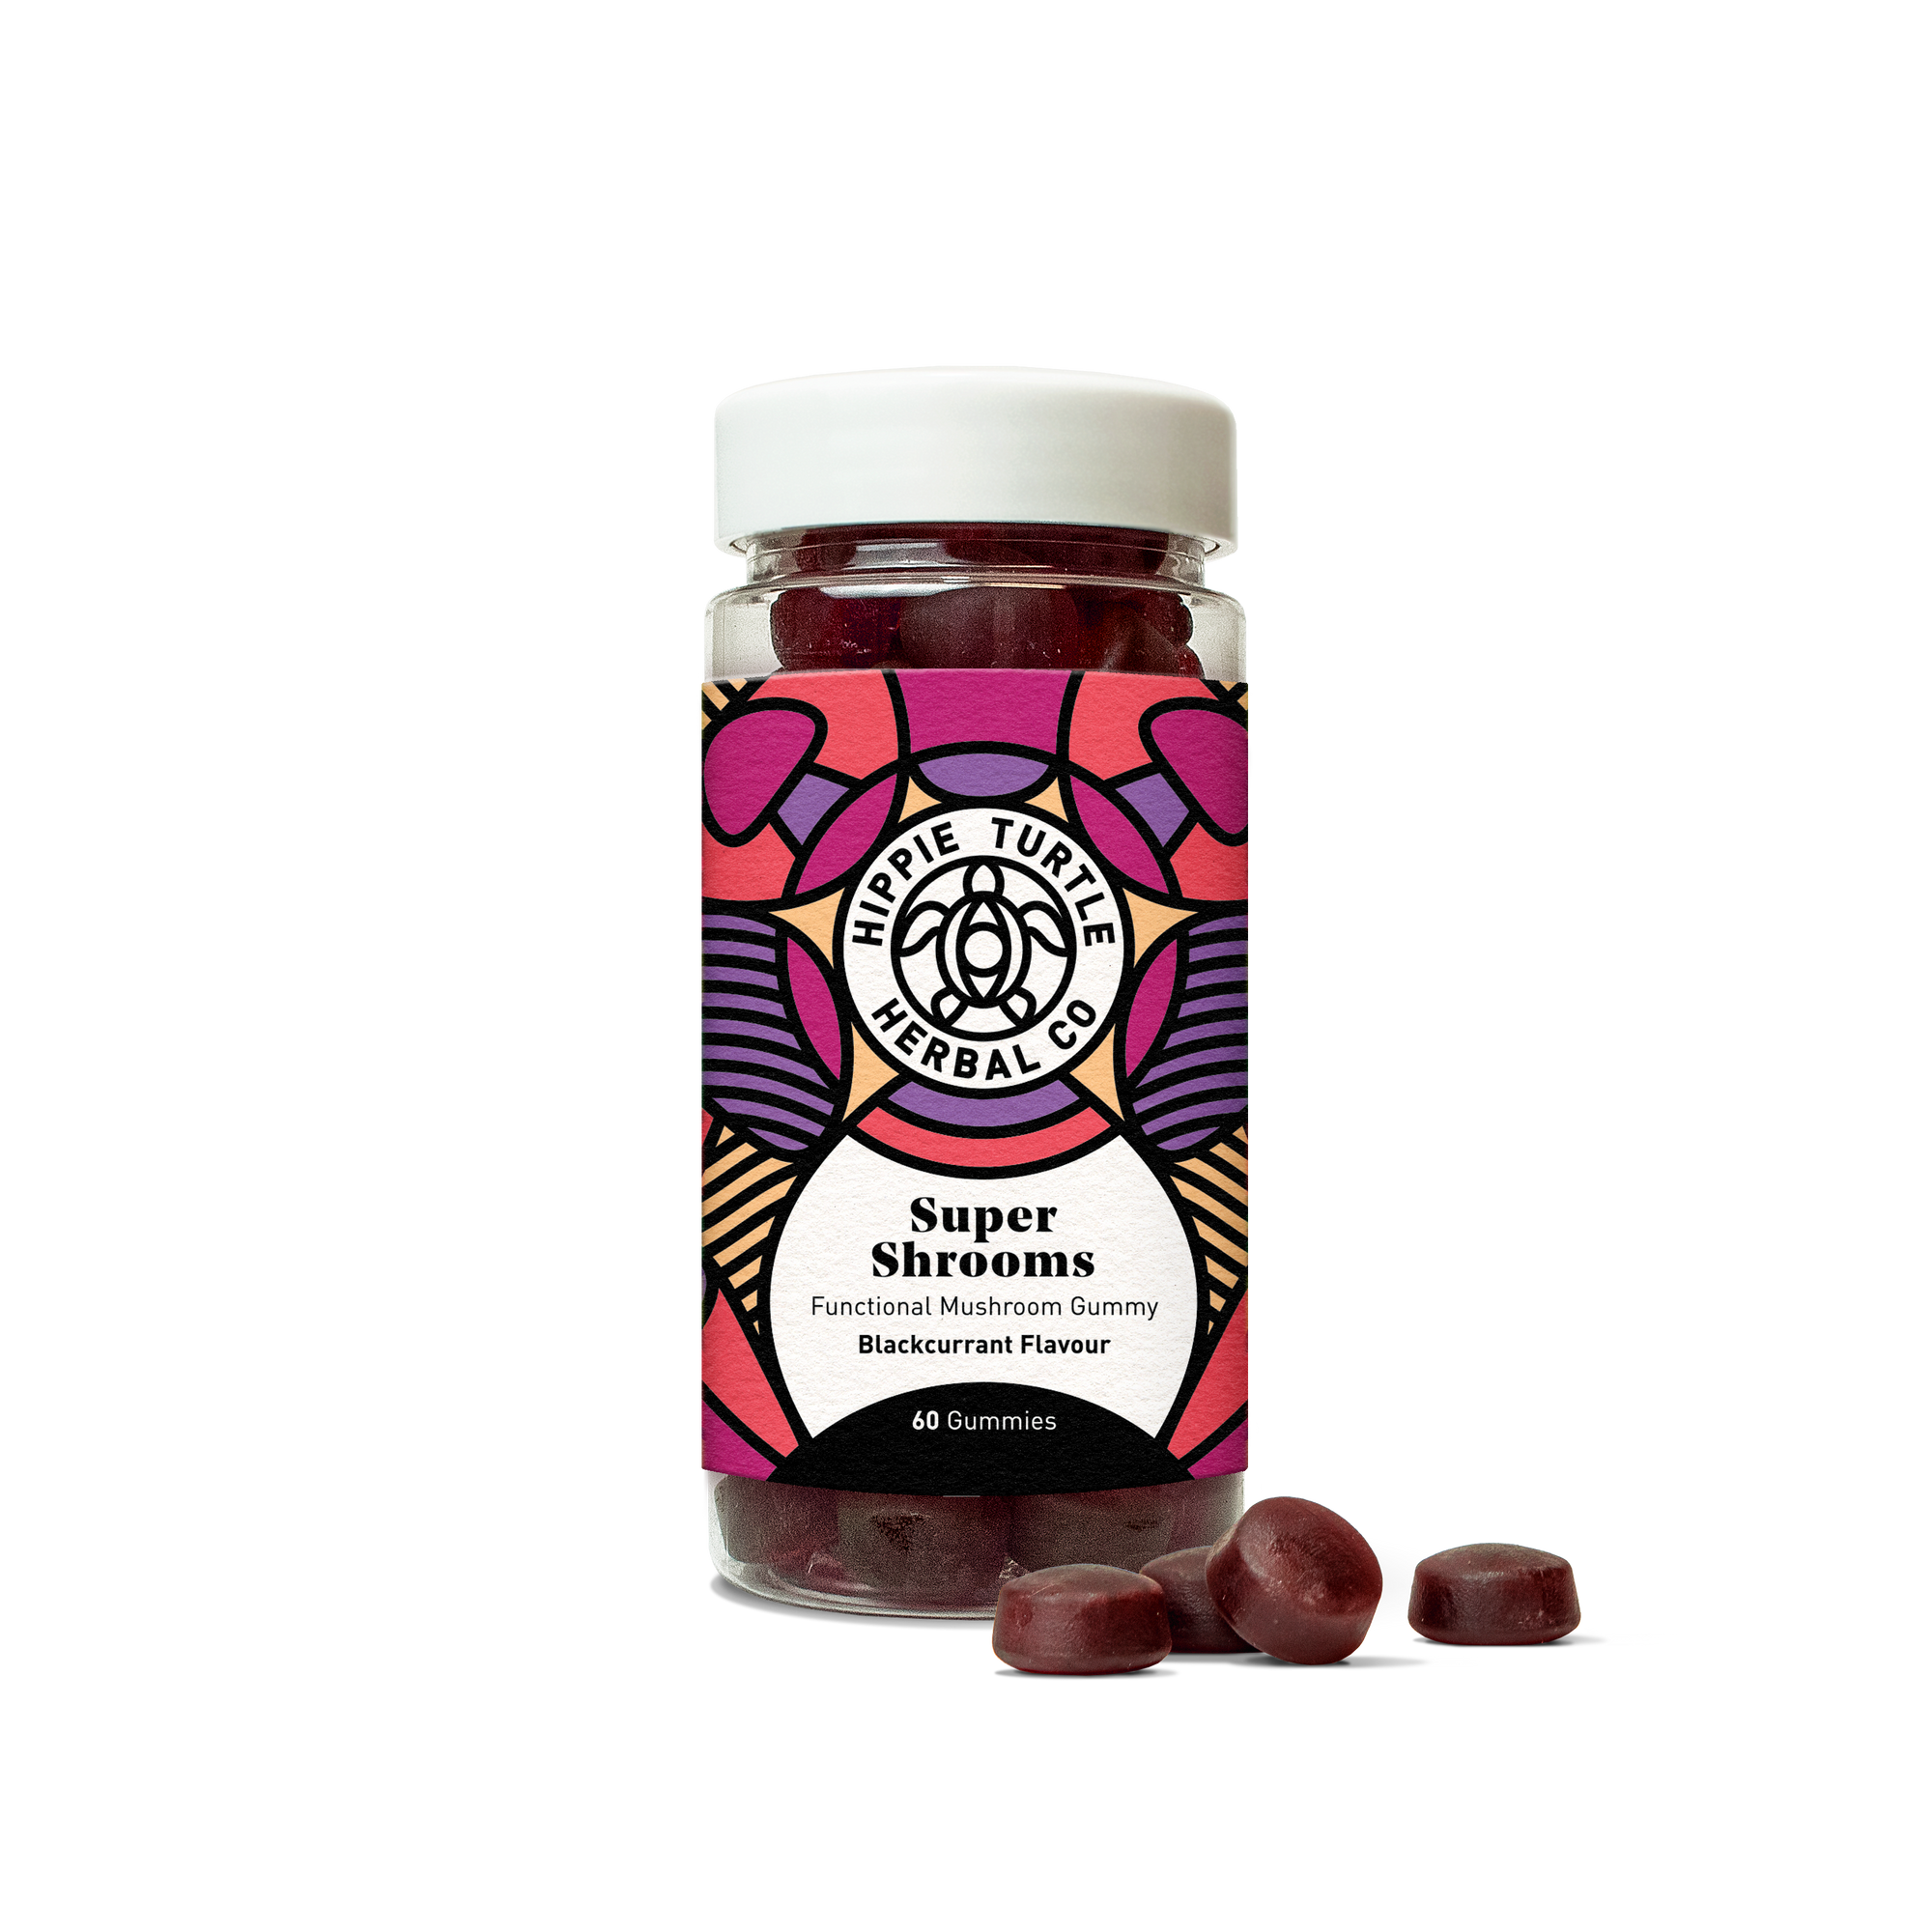 Super Shrooms gummies, chewable functional mushroom gummies with ginseng, iodine and vitamin B5 for energy, mood and focus